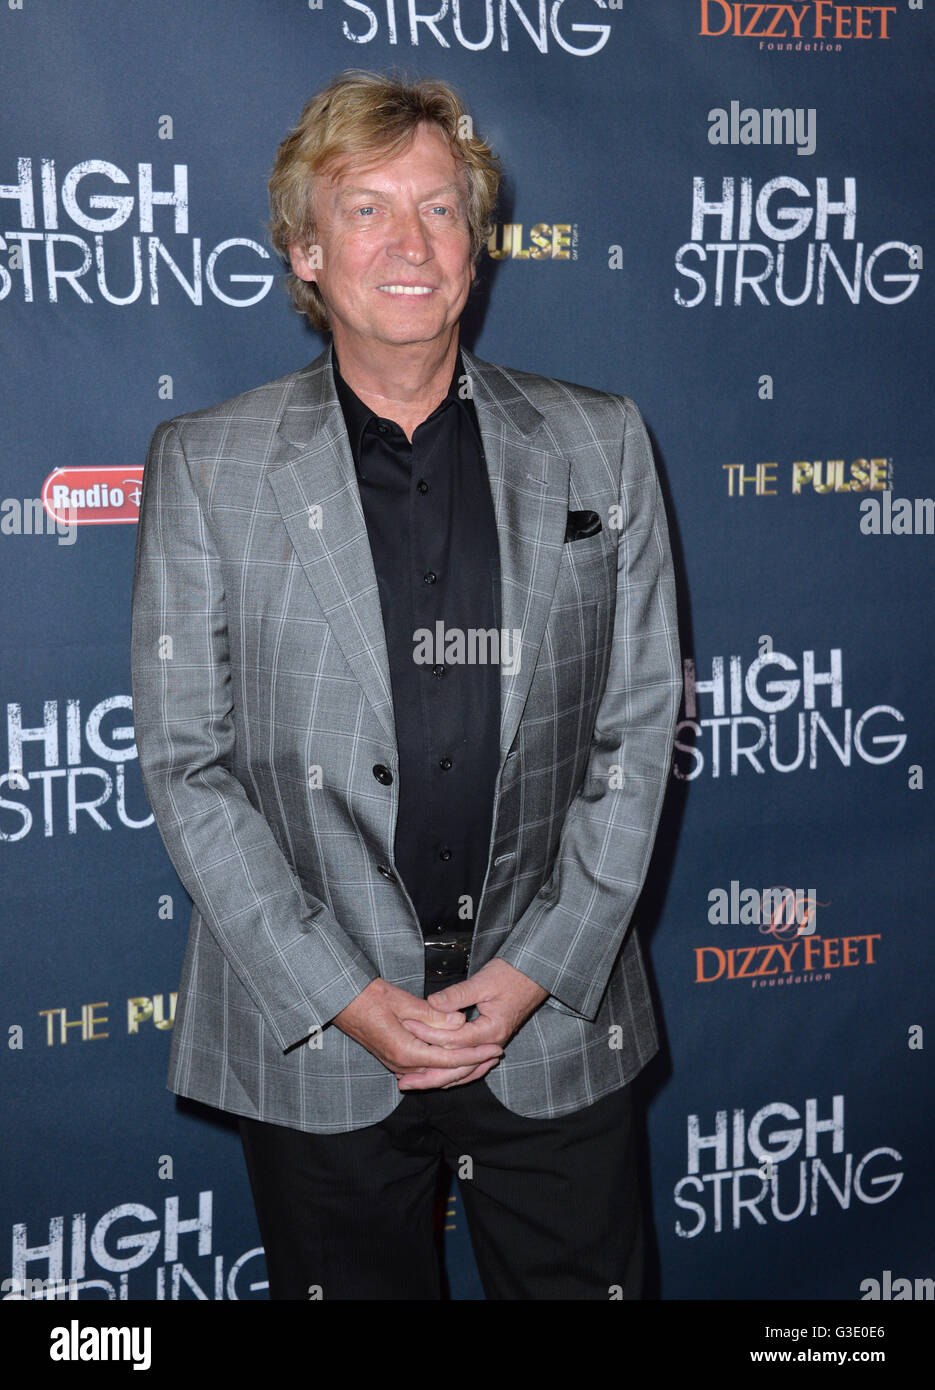 LOS ANGELES, CA - MARCH 29, 2016: Nigel Lythgoe at the premiere for 'High Strung' at the TCL Chinese 6 Theatres, Hollywood. Stock Photo